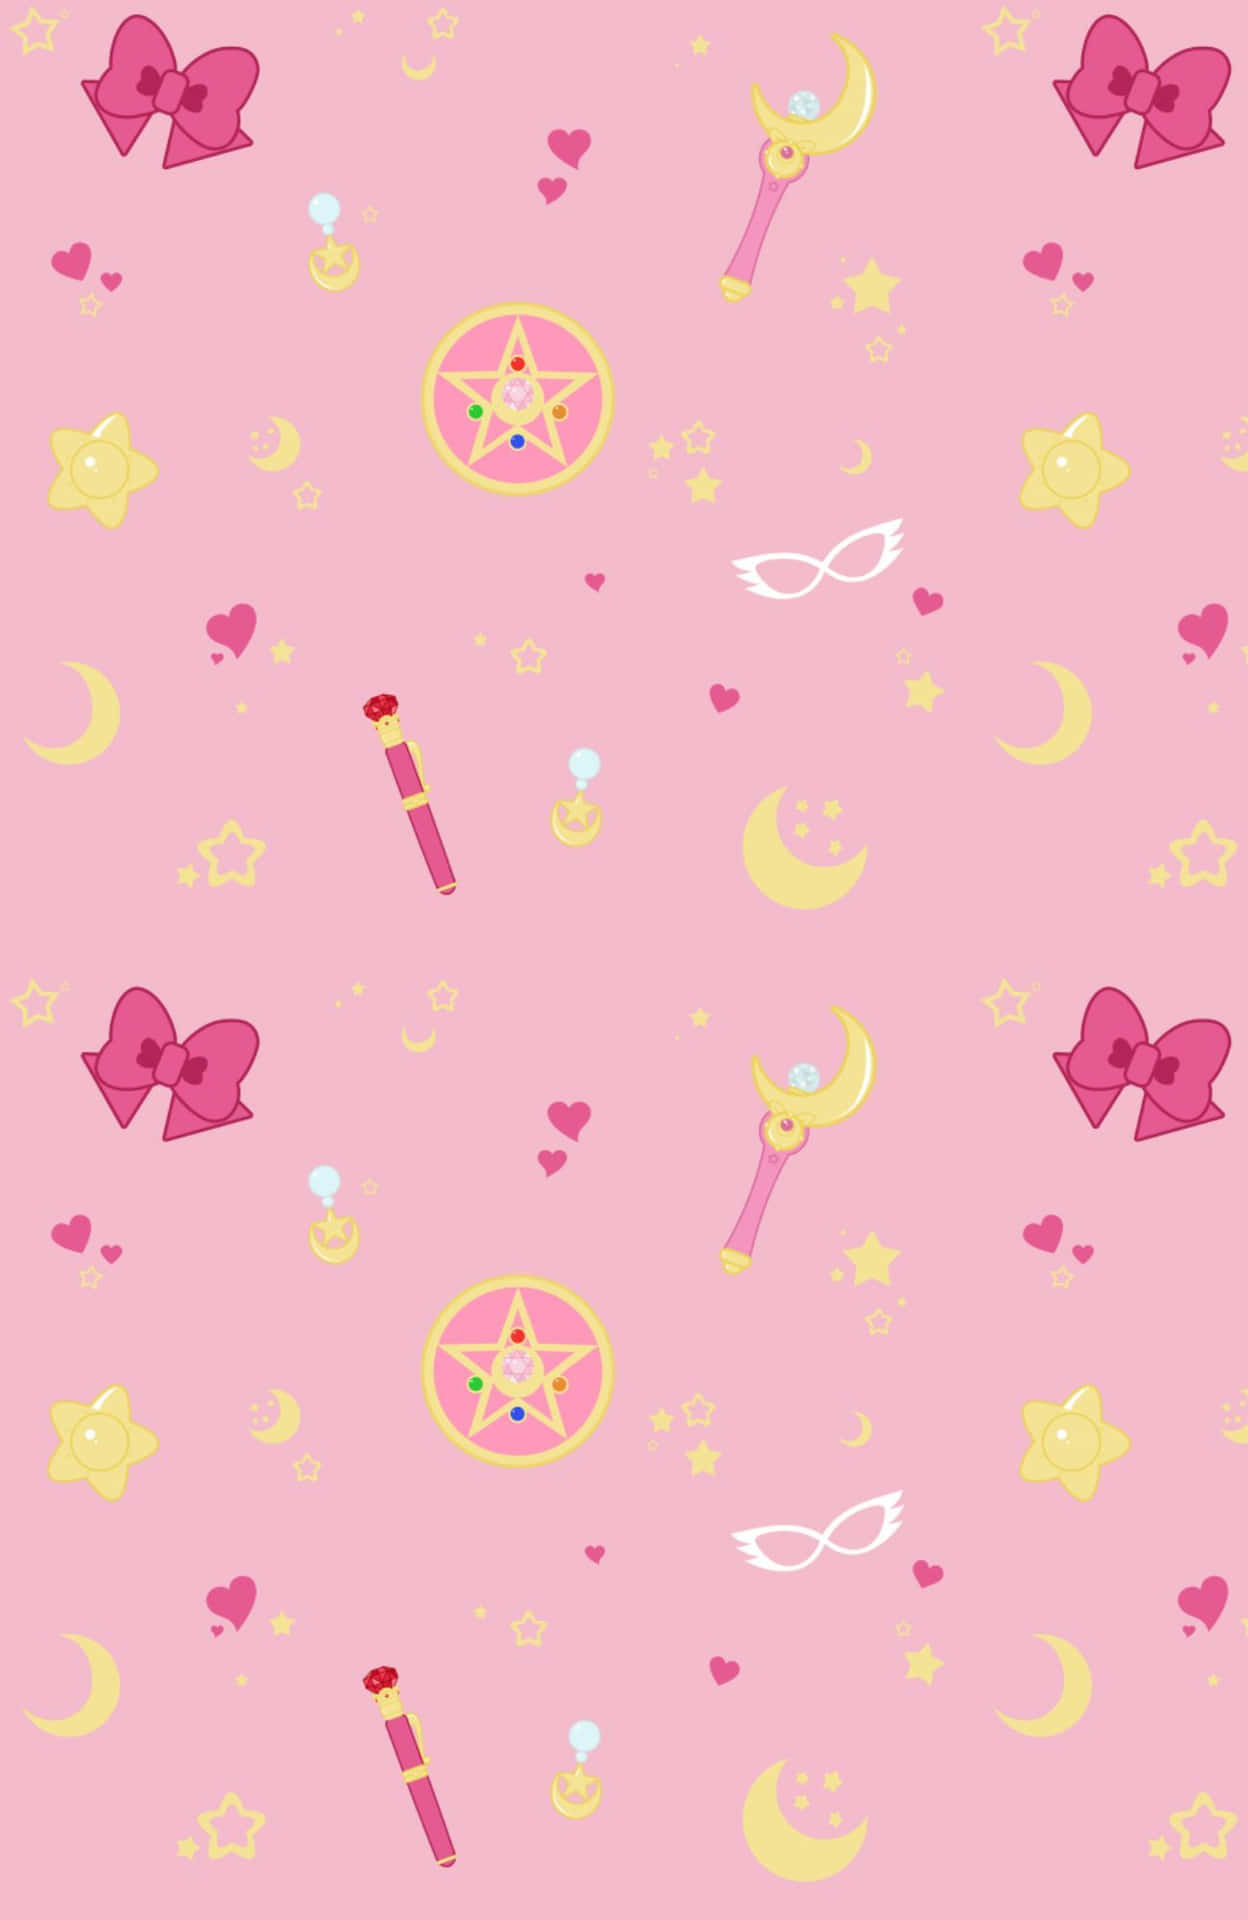 Explore the magical world of Sailor Moon with your iPad. Wallpaper